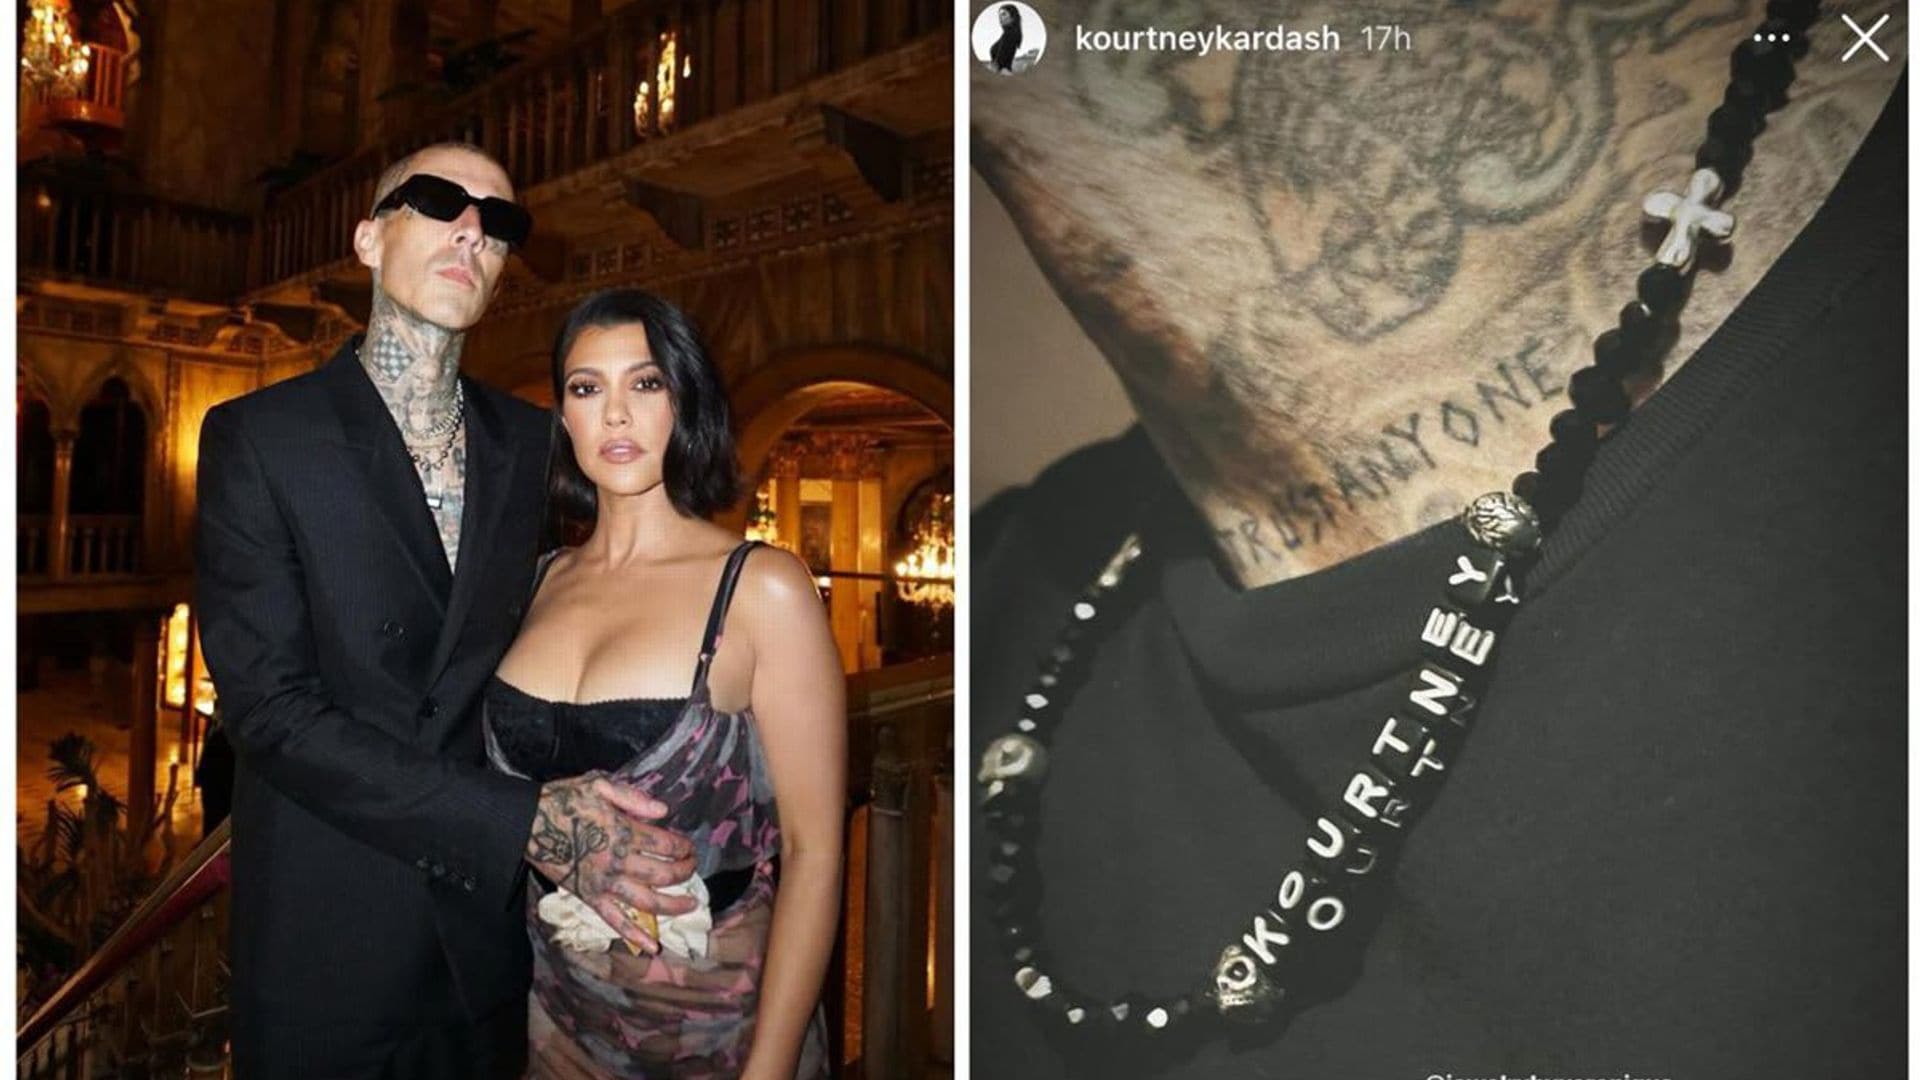 Kourtney Kardashian and Travis Barker found another way to declare their love for each other